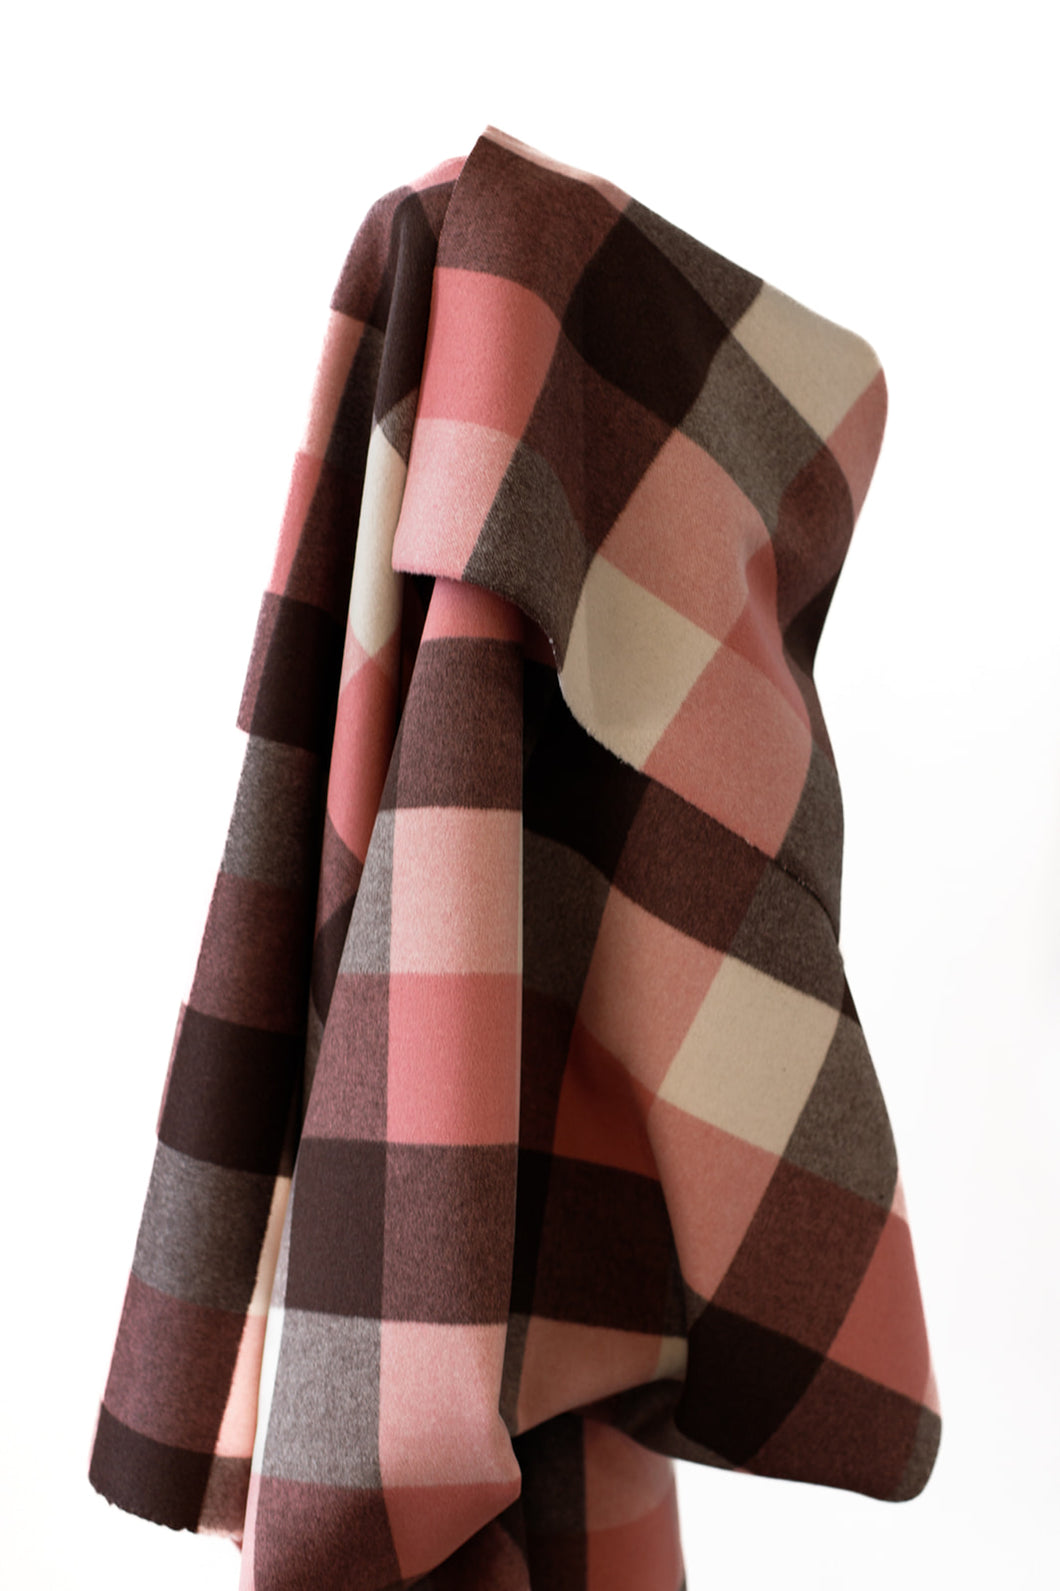 Doubled Sided Pink Check 100% Wool Blend 150 cm w $55 pm